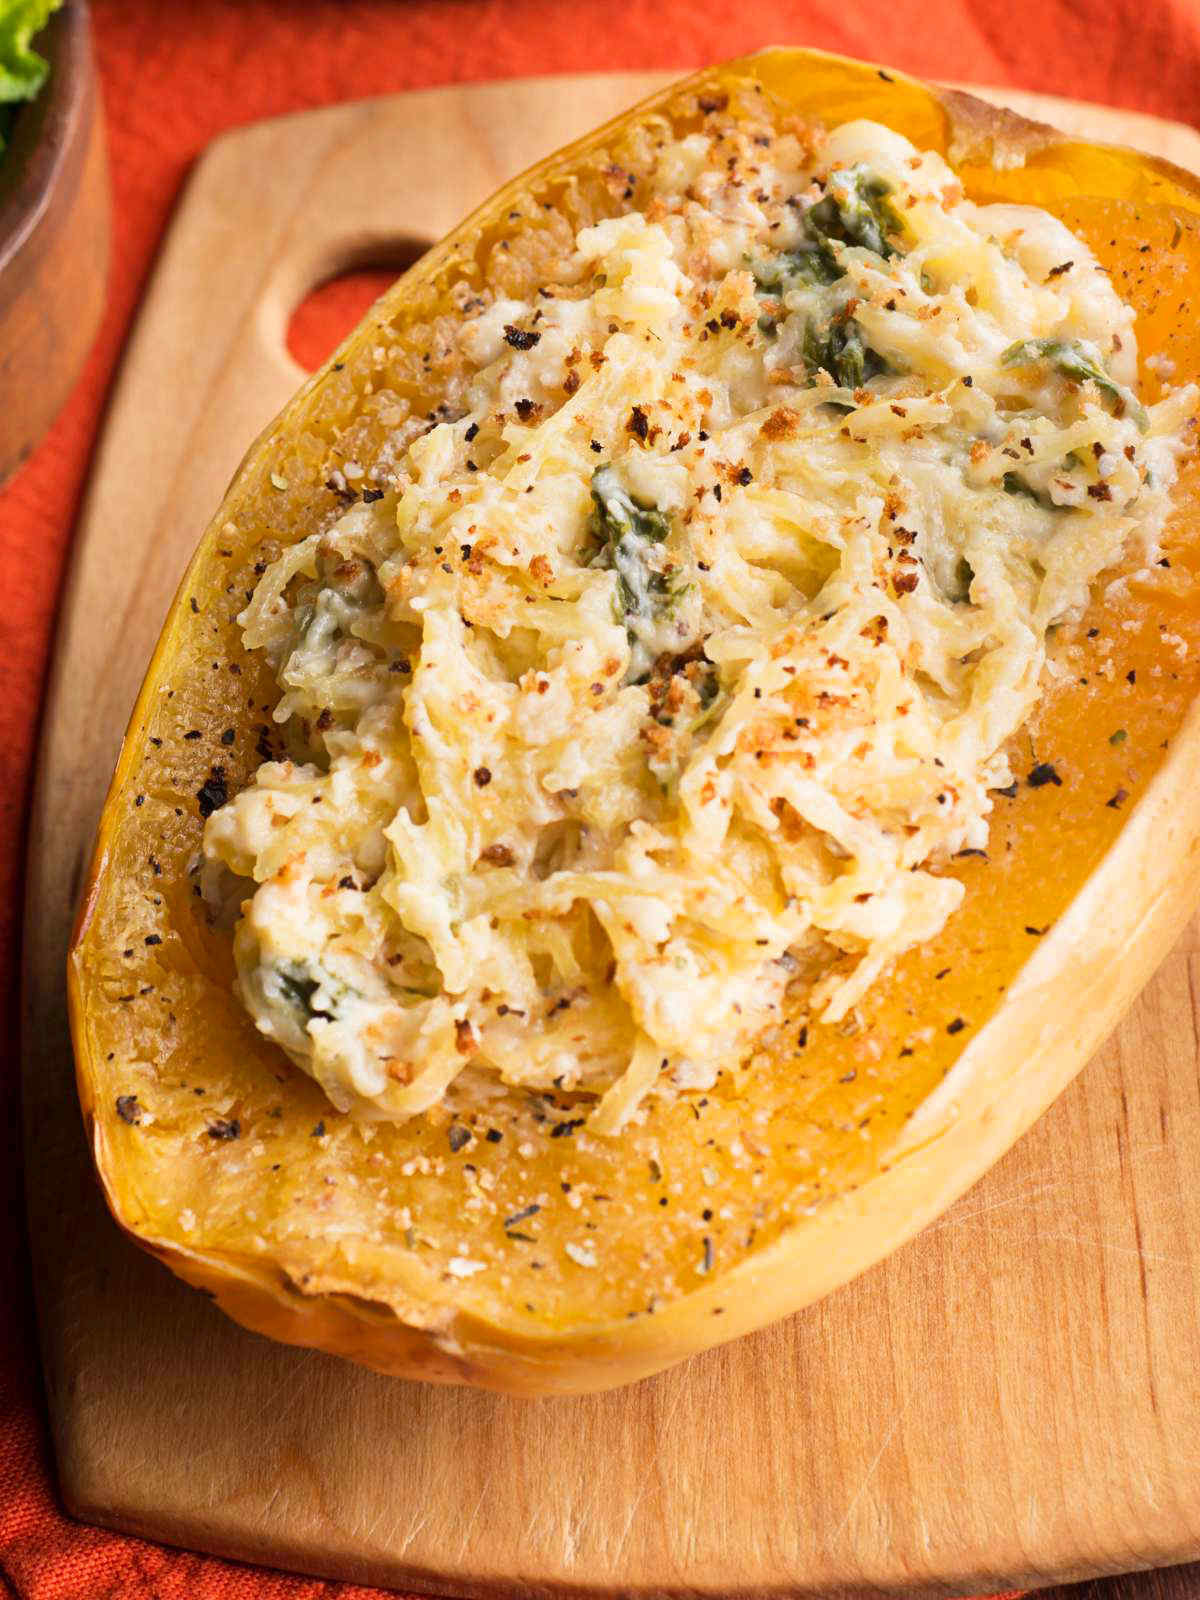 Spaghetti squash pasta topped with creamy pasta sauce and herbs.